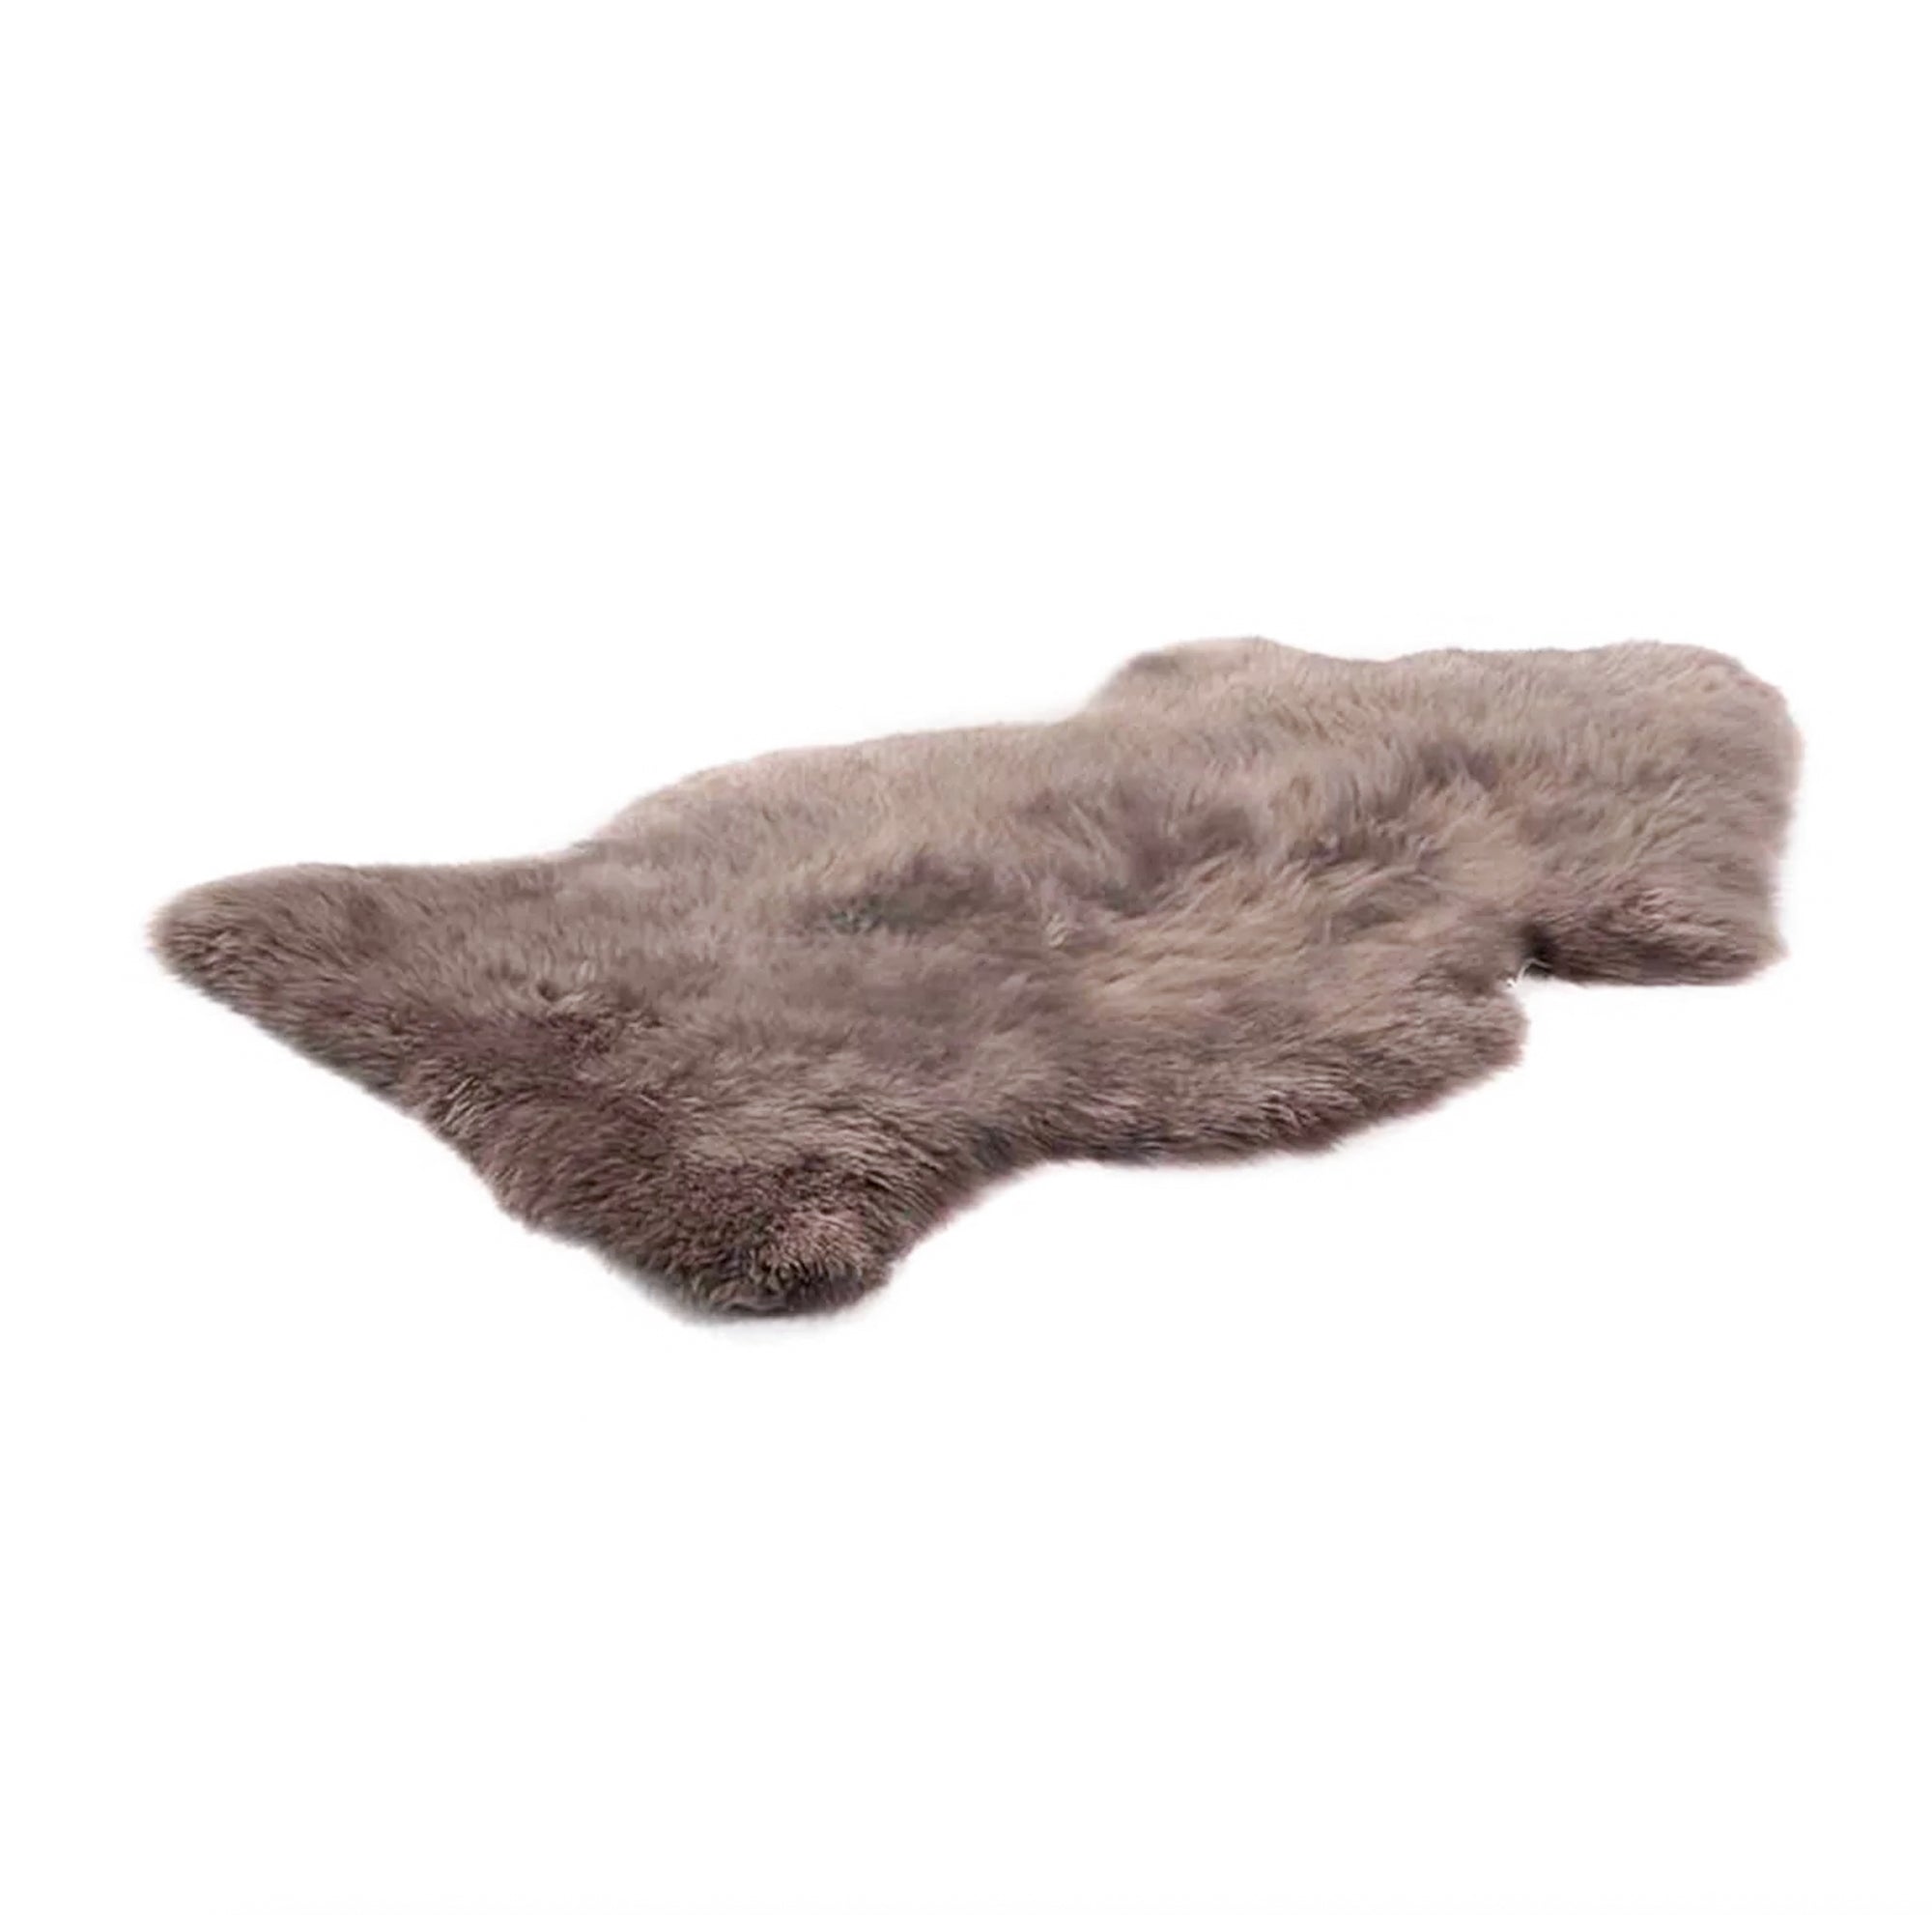 NZ Longwool Sheepskins Life of Riley Pet Products  The Life of Riley